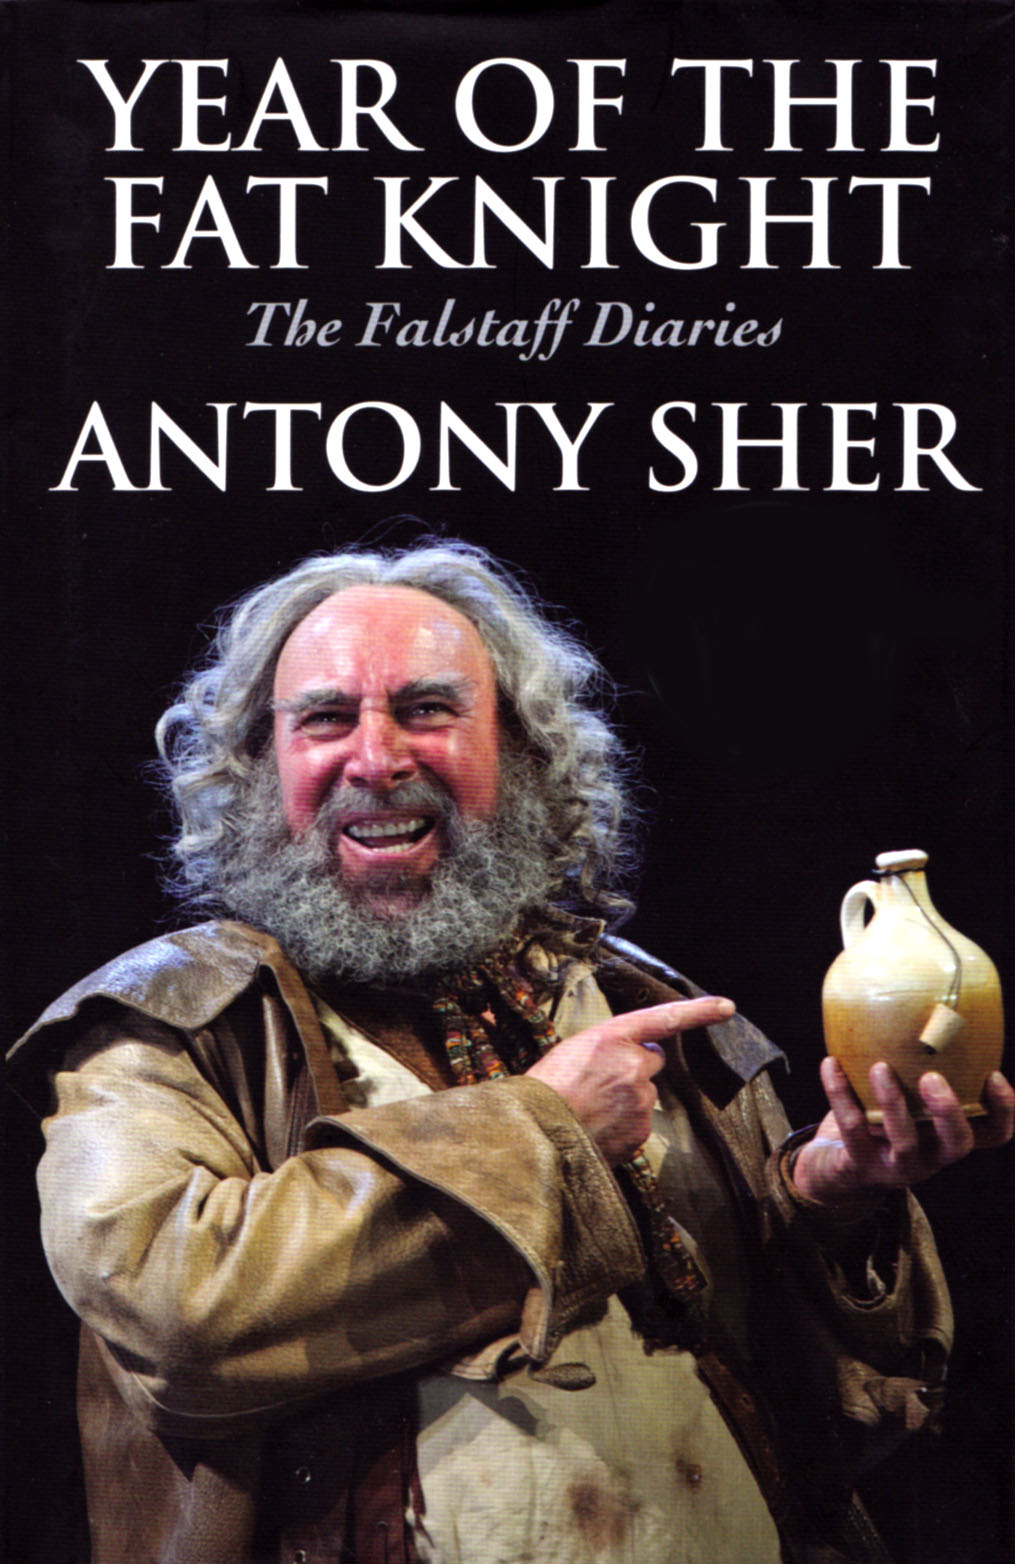 YEAR OF THE FAT KNIGHT: The Falstaff Diaries by Antony Sher